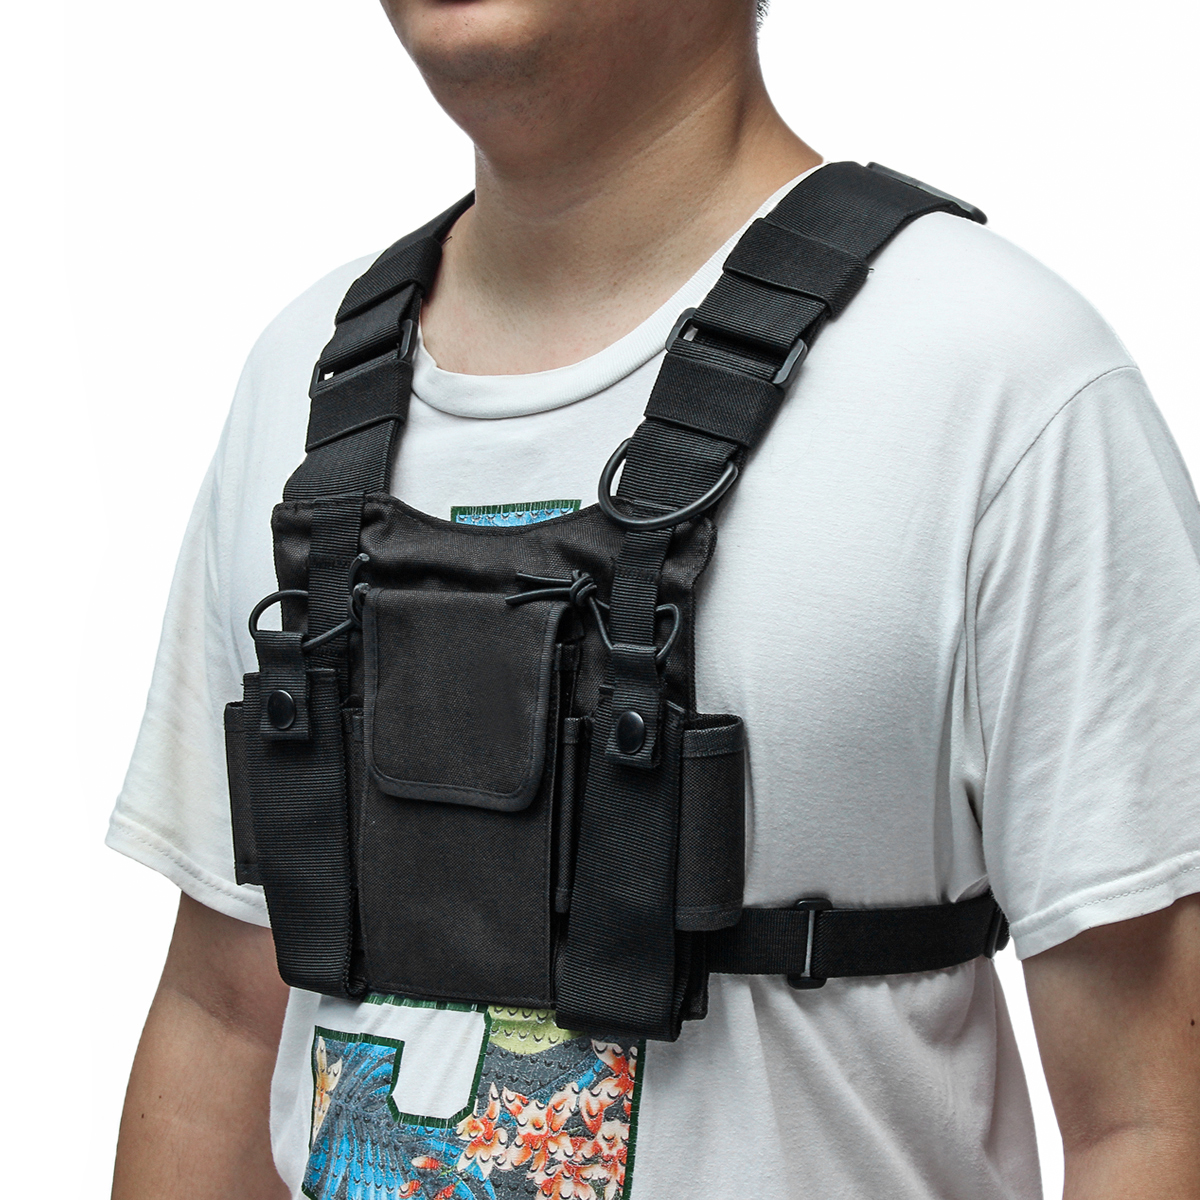 Chest-3-Pocket-Harness-Nylon-Bag-Pack-Backpack-Holster-for-Radio-Walkie-Talkie-Two-Way-Radio-1350160-9